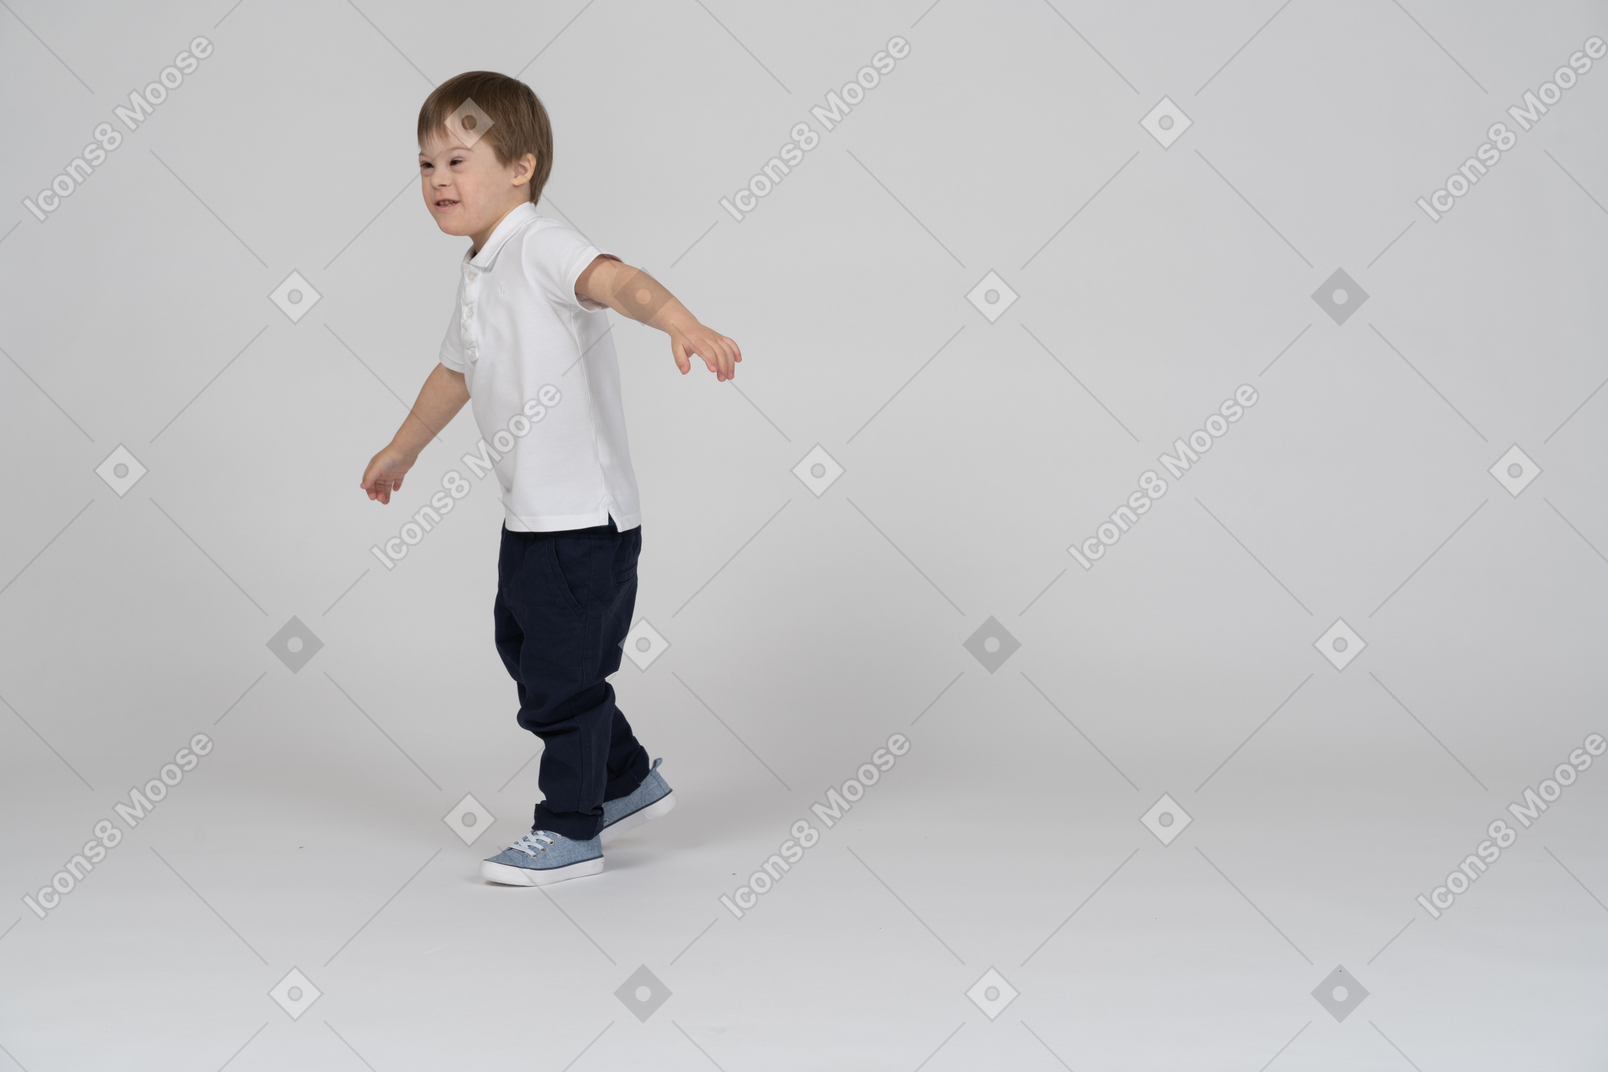 Side view of a boy playing around